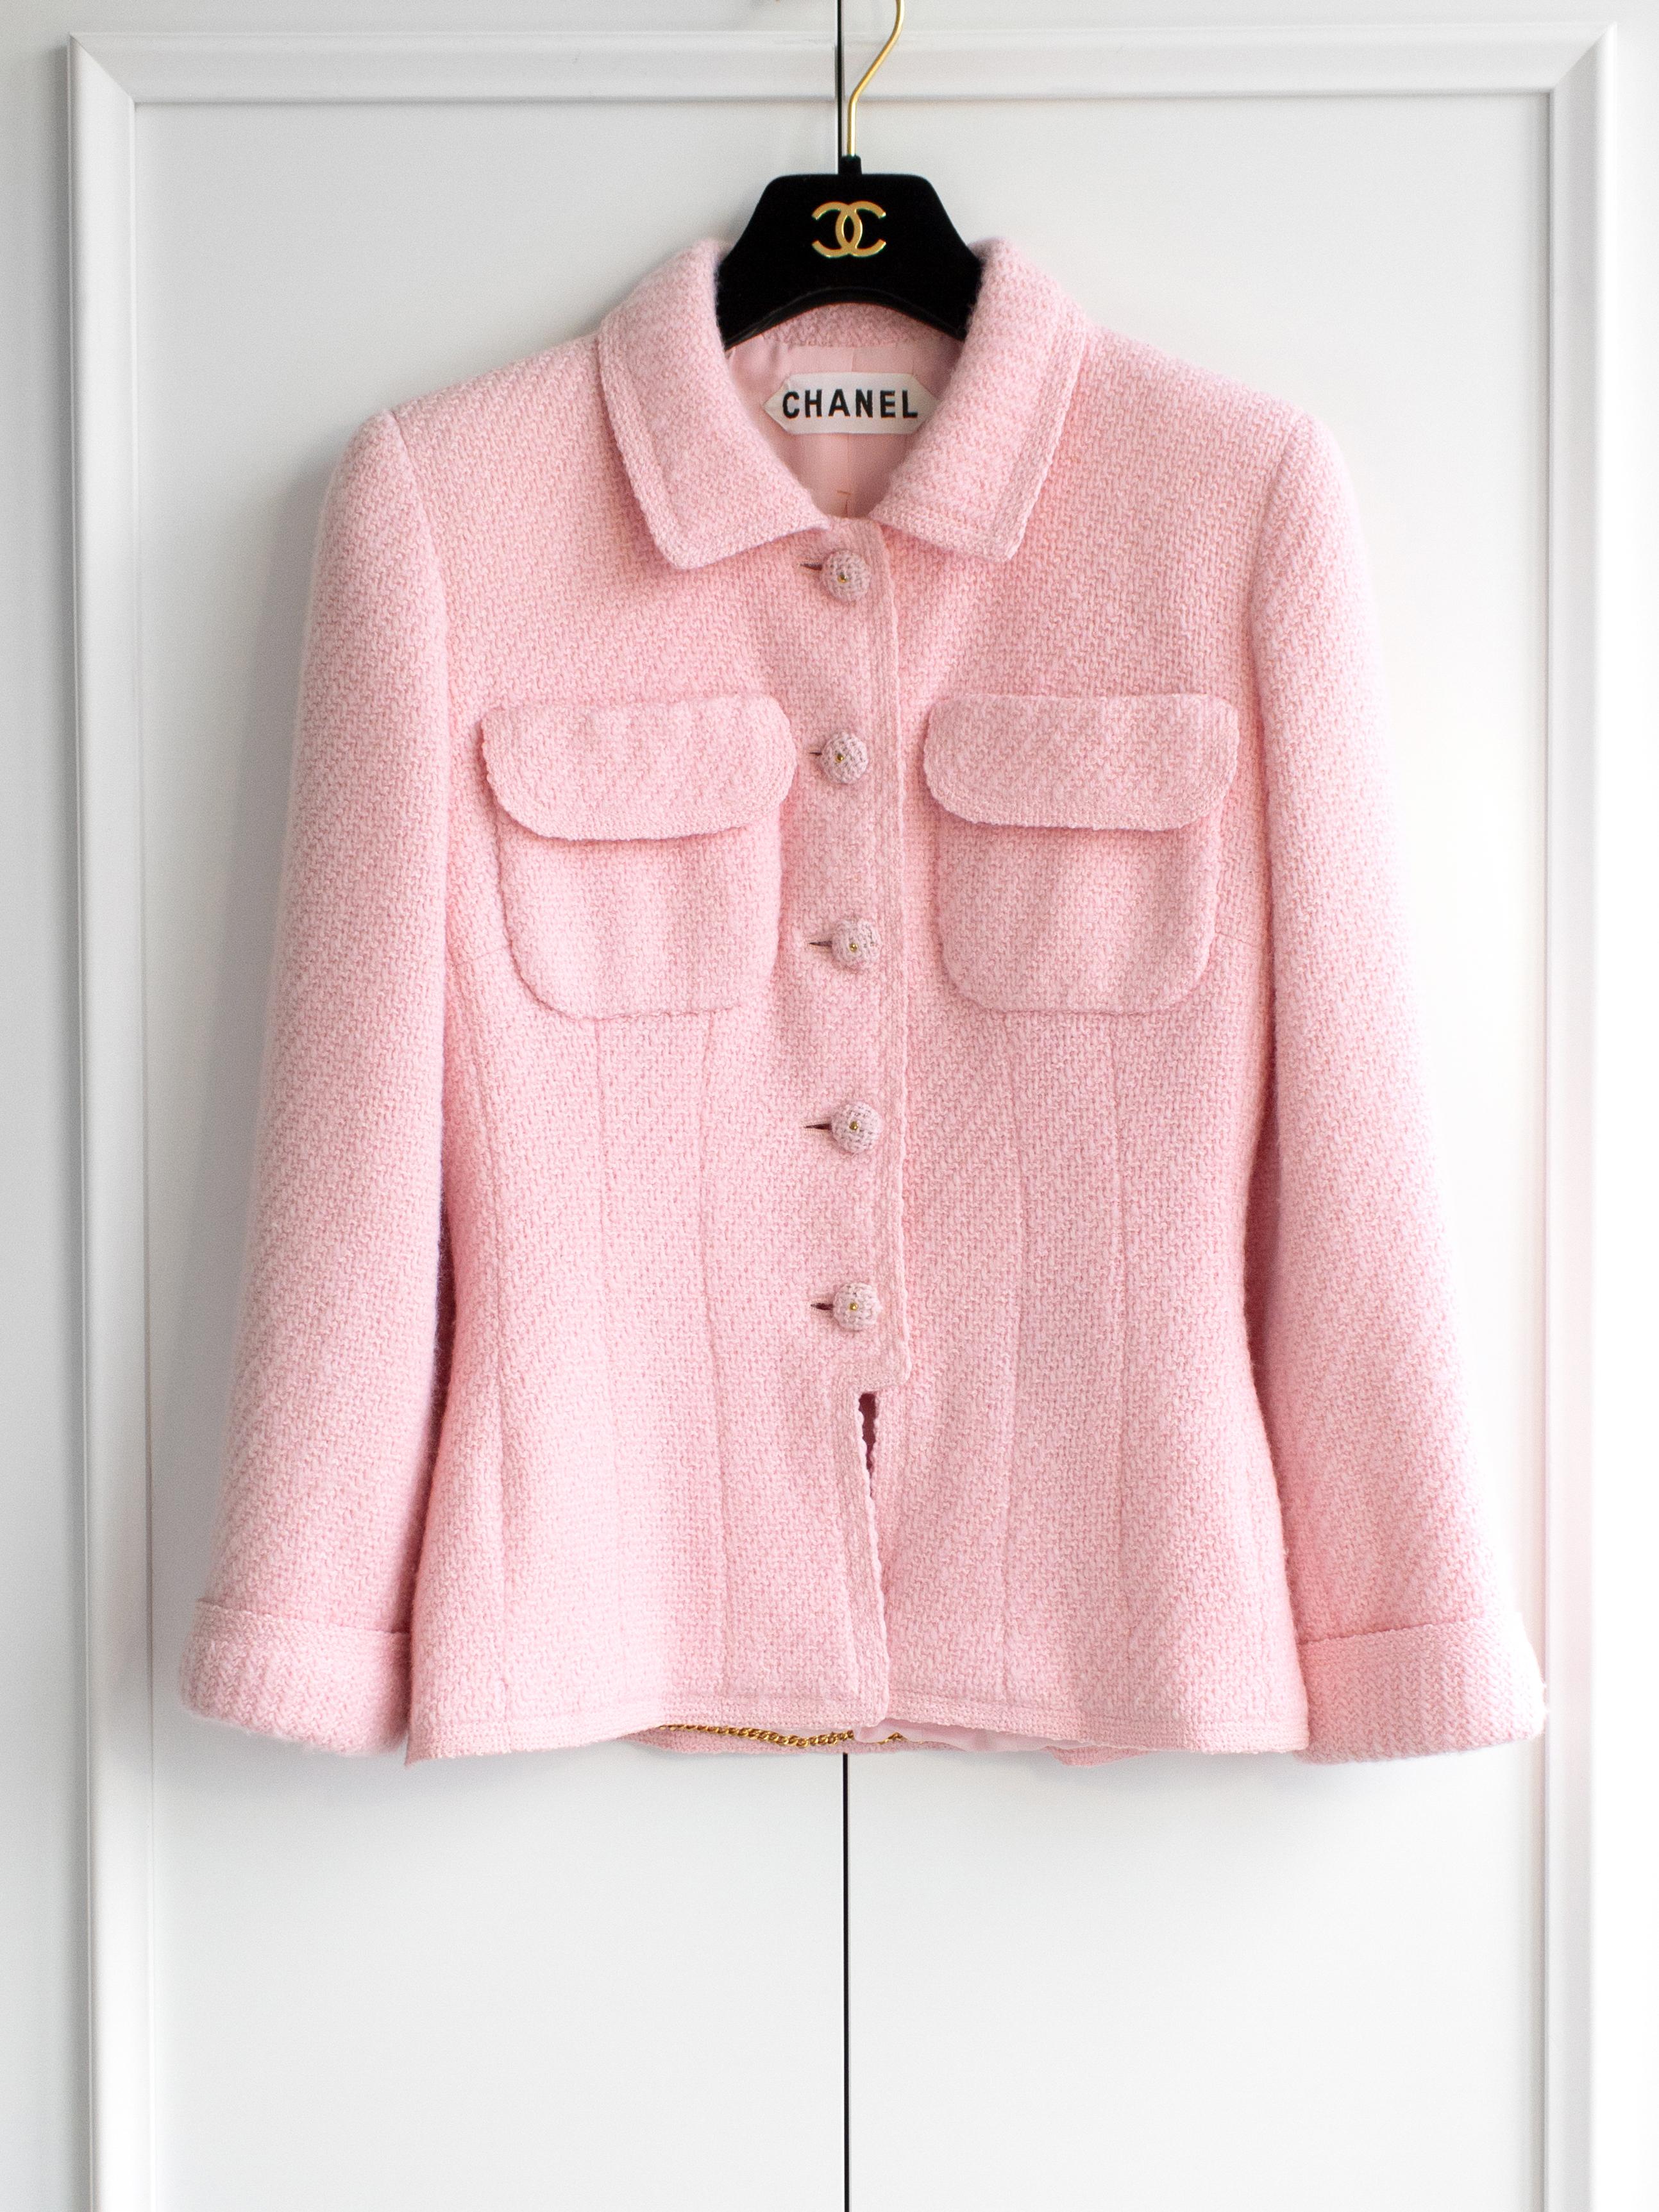 Chanel Vintage Spring/Summer 1995 Haute Couture Pink Tweed Jacket For Sale 1